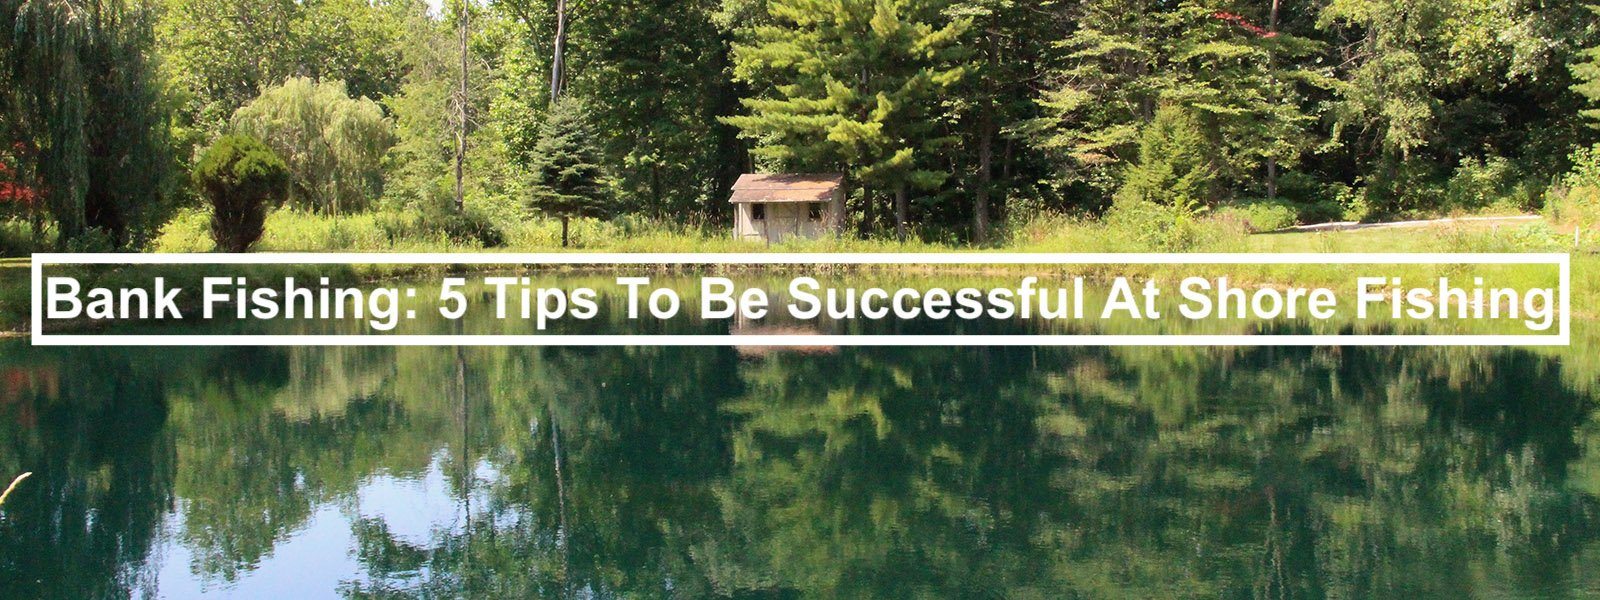 Best 5 Bank Fishing Tips To Be Successful At Shore Fishing